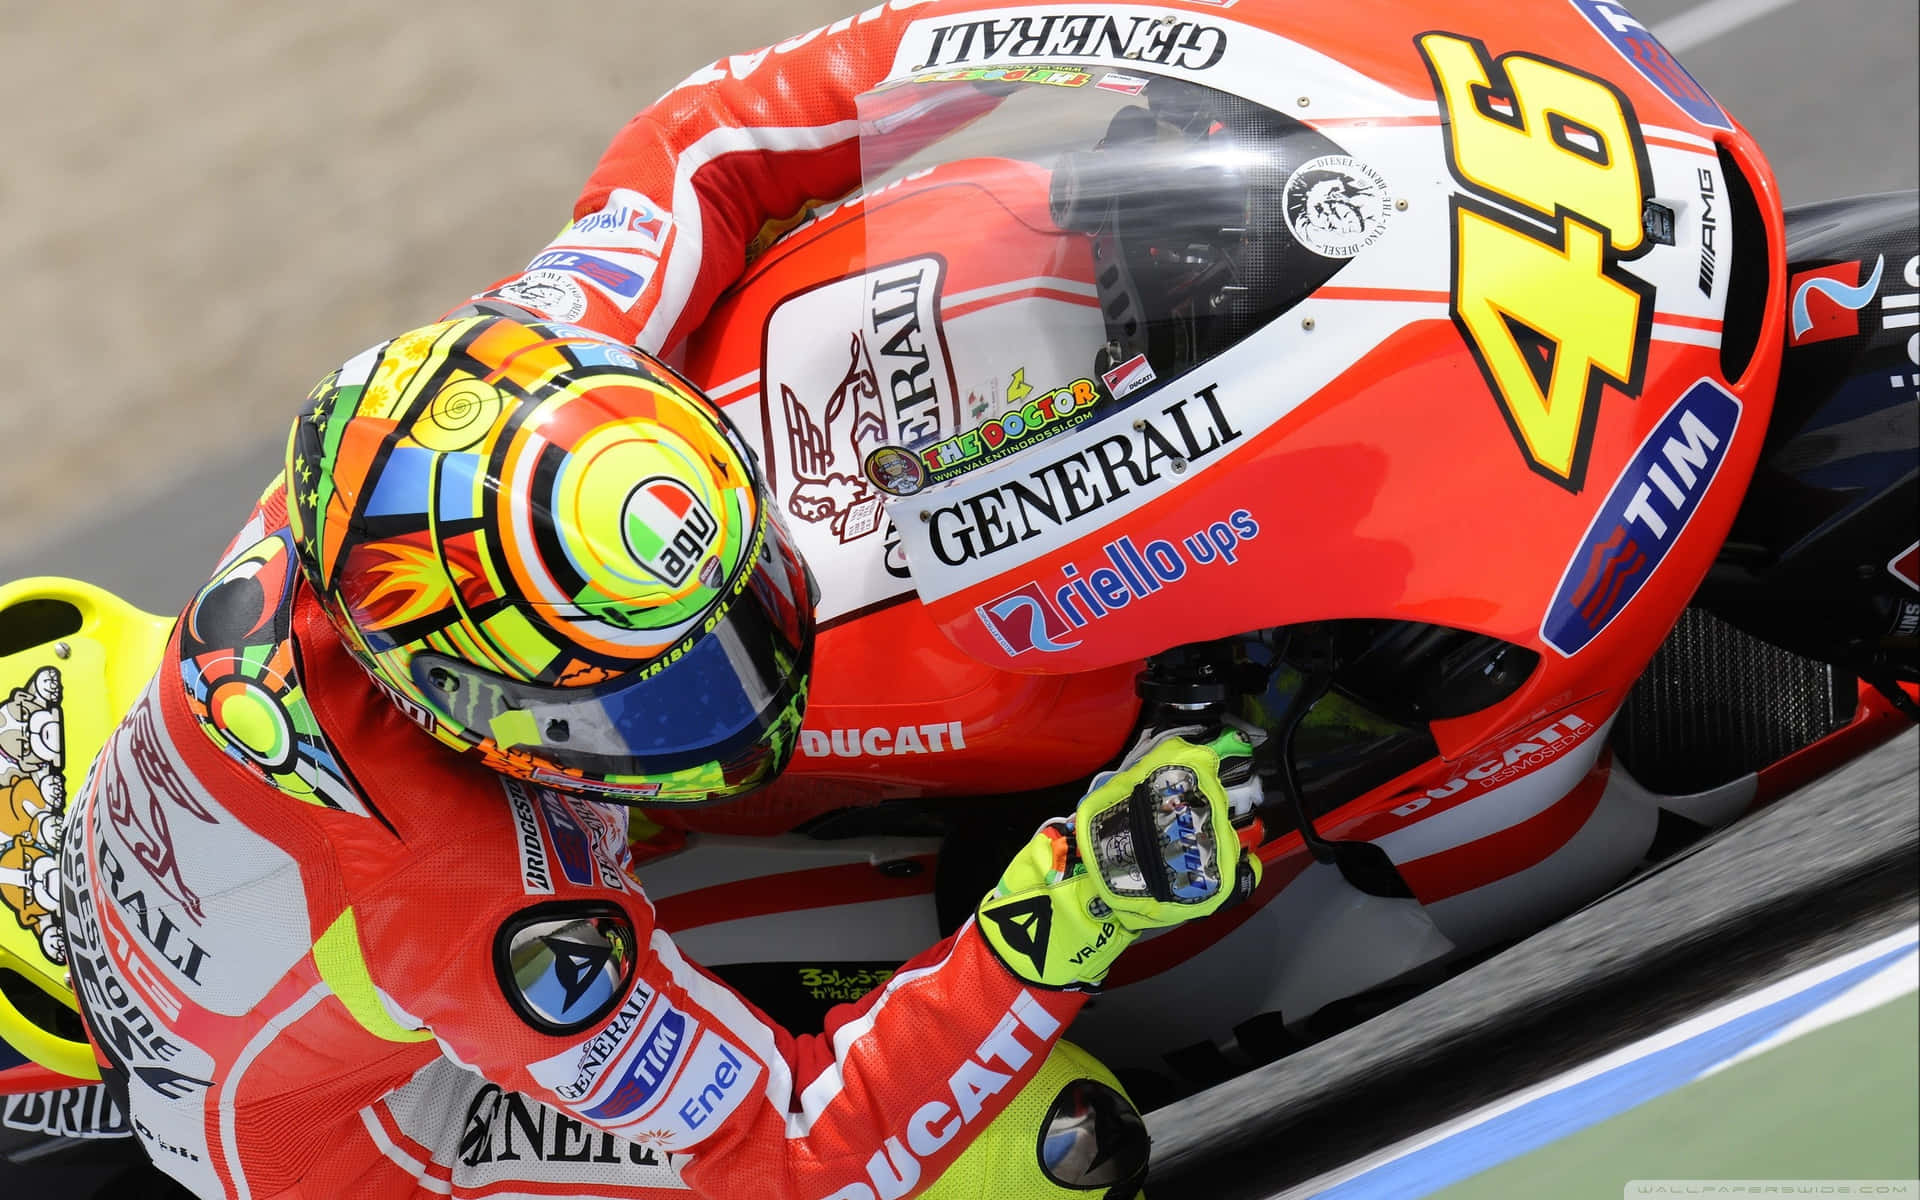 Vr46 Red Ducati Motorcycle Background